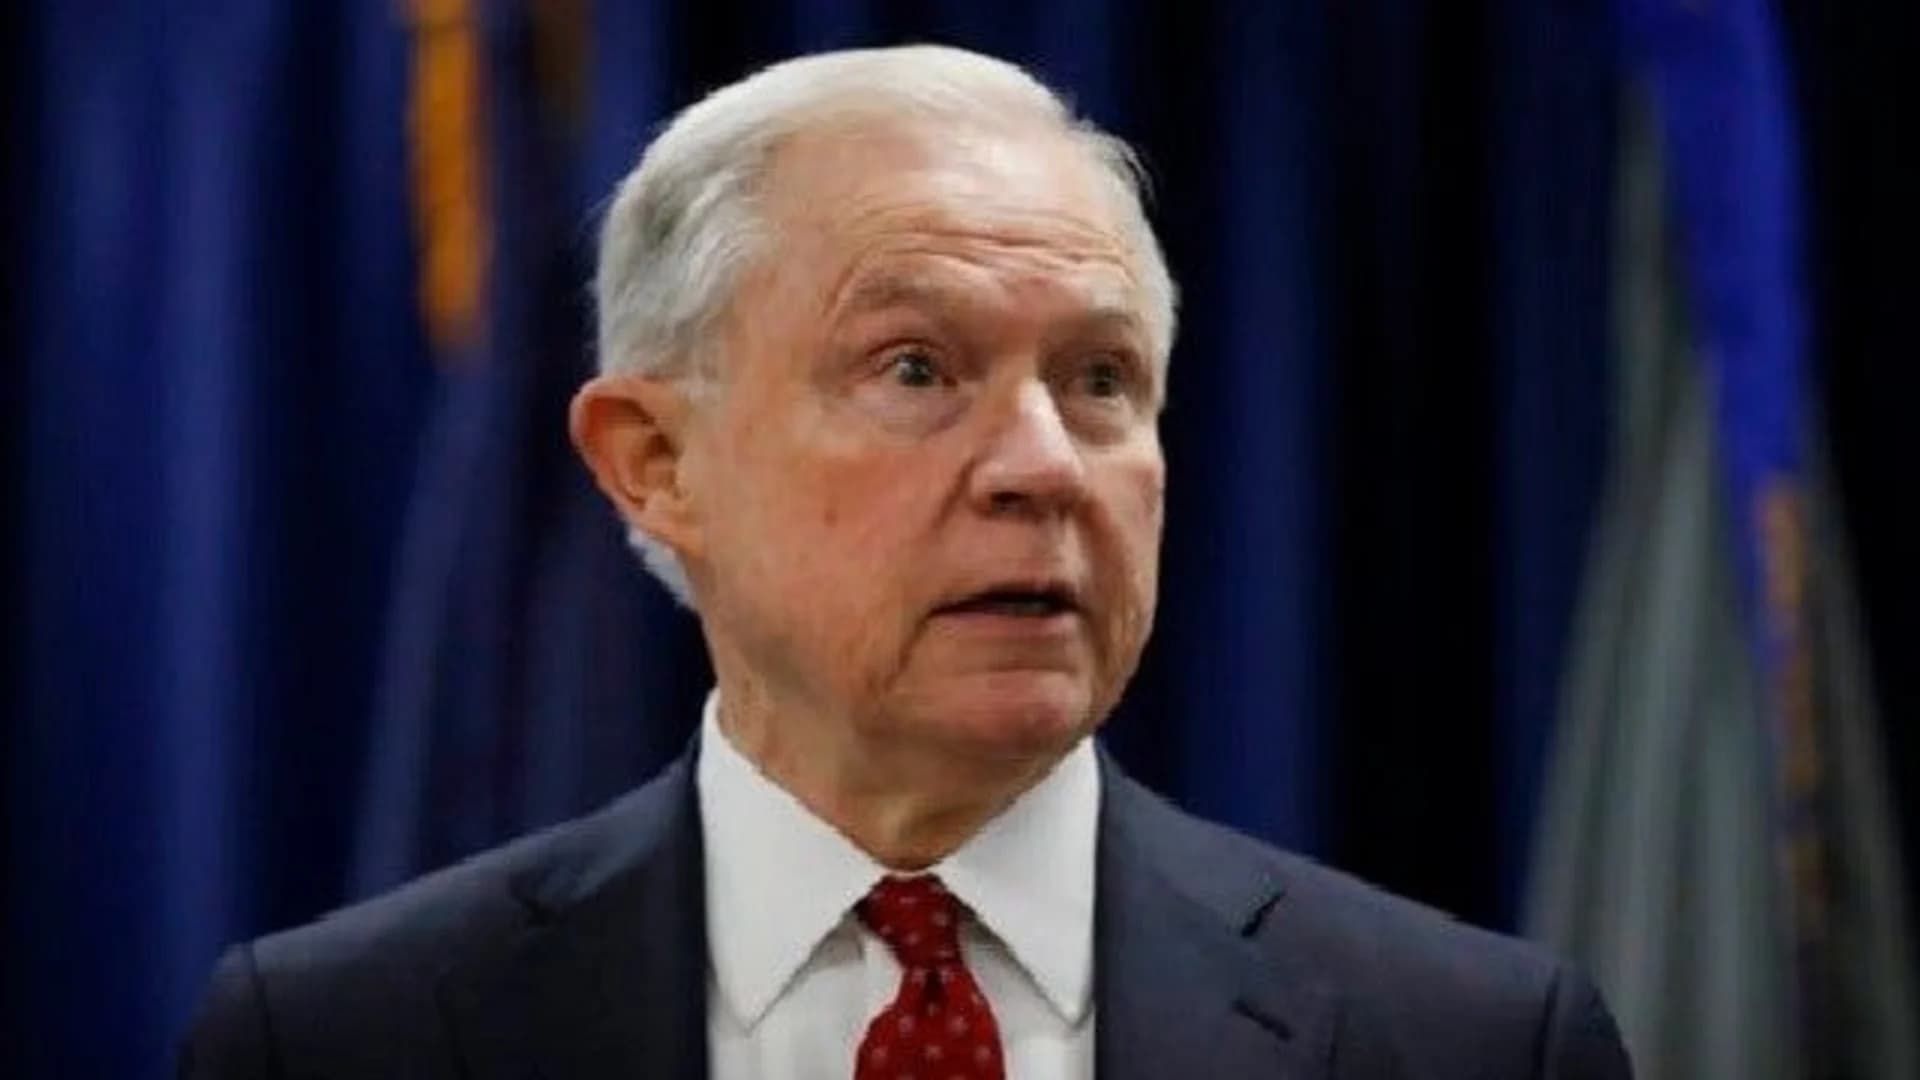 Sessions vows crackdown on leaks of classified information